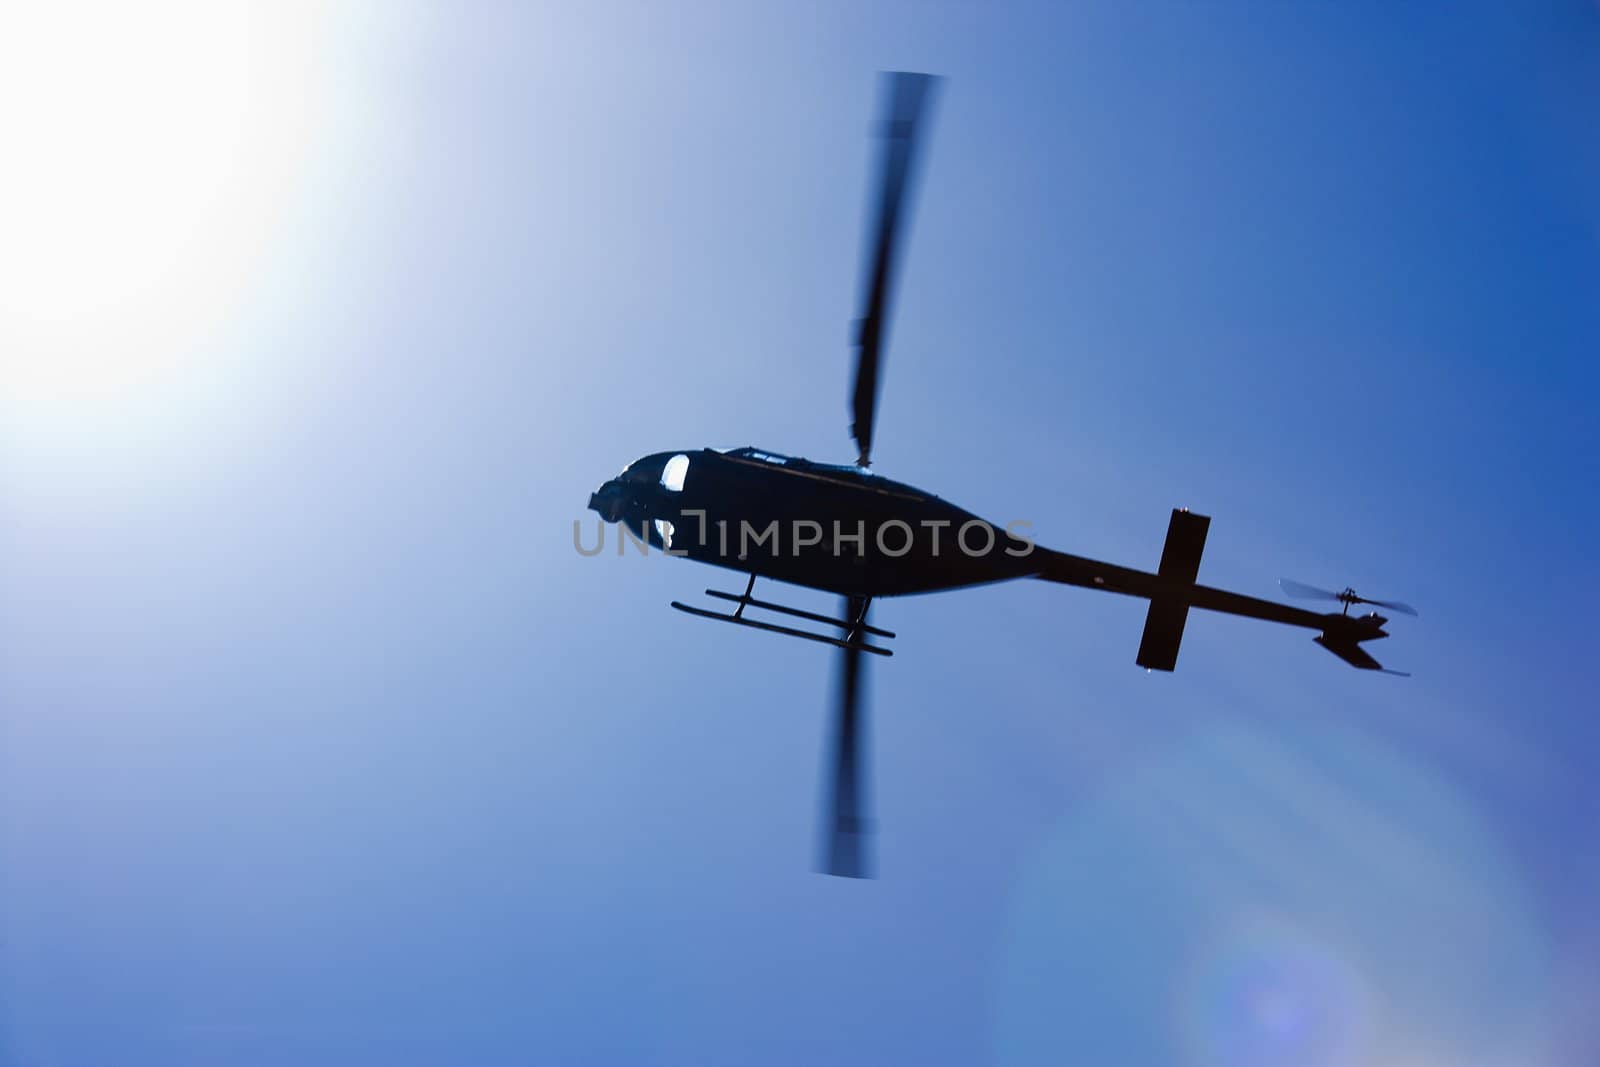 Low angle motion shot of helicopter flying overhead through blue sky.